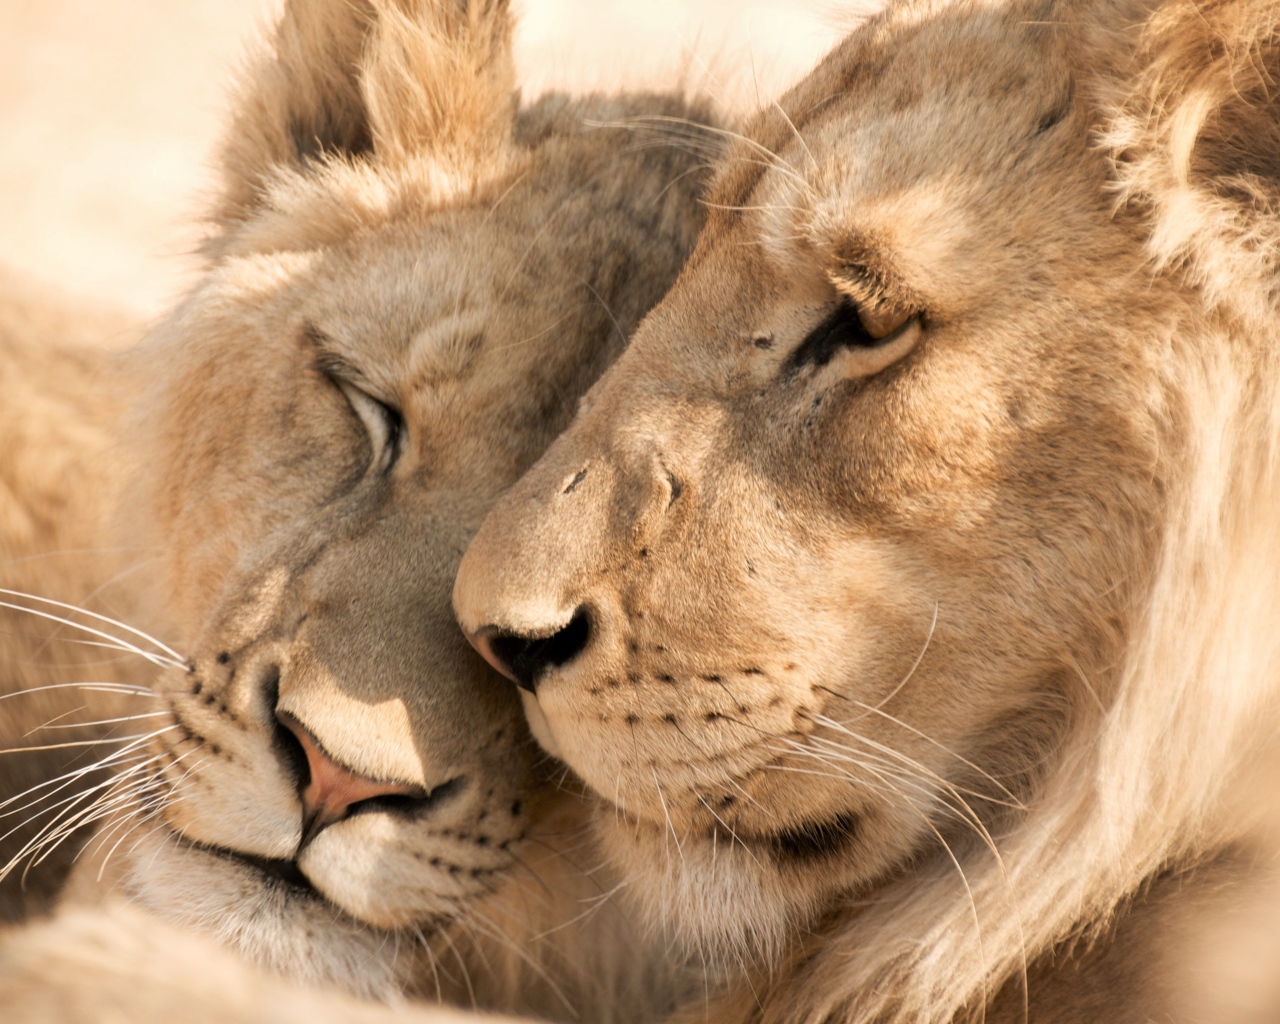 Enamored lion and lioness close up